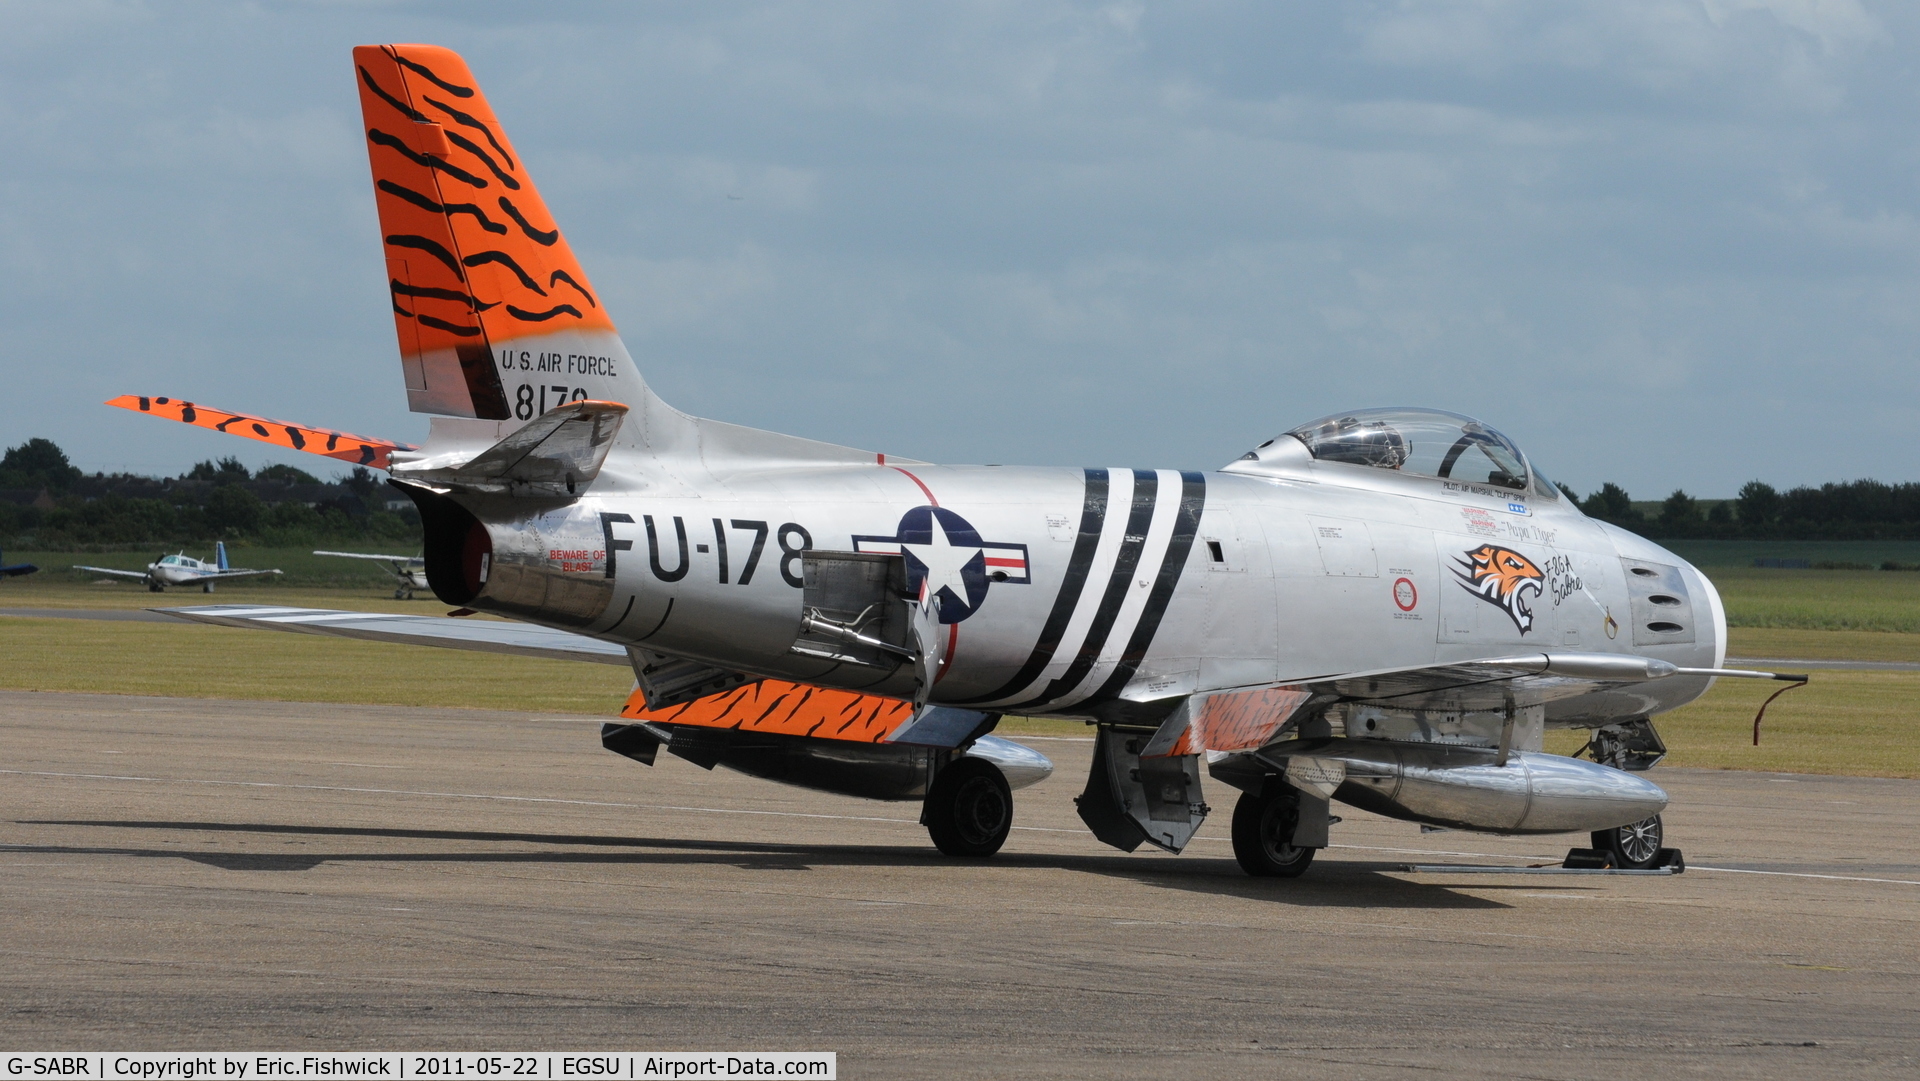 G-SABR, 1948 North American F-86A Sabre C/N 151-083 (151-43547), 2. G-SABR at Duxford's Spring Air Show, May 2011 with Tiger Meet scheme - Believed to be the oldest flying jet in the world.